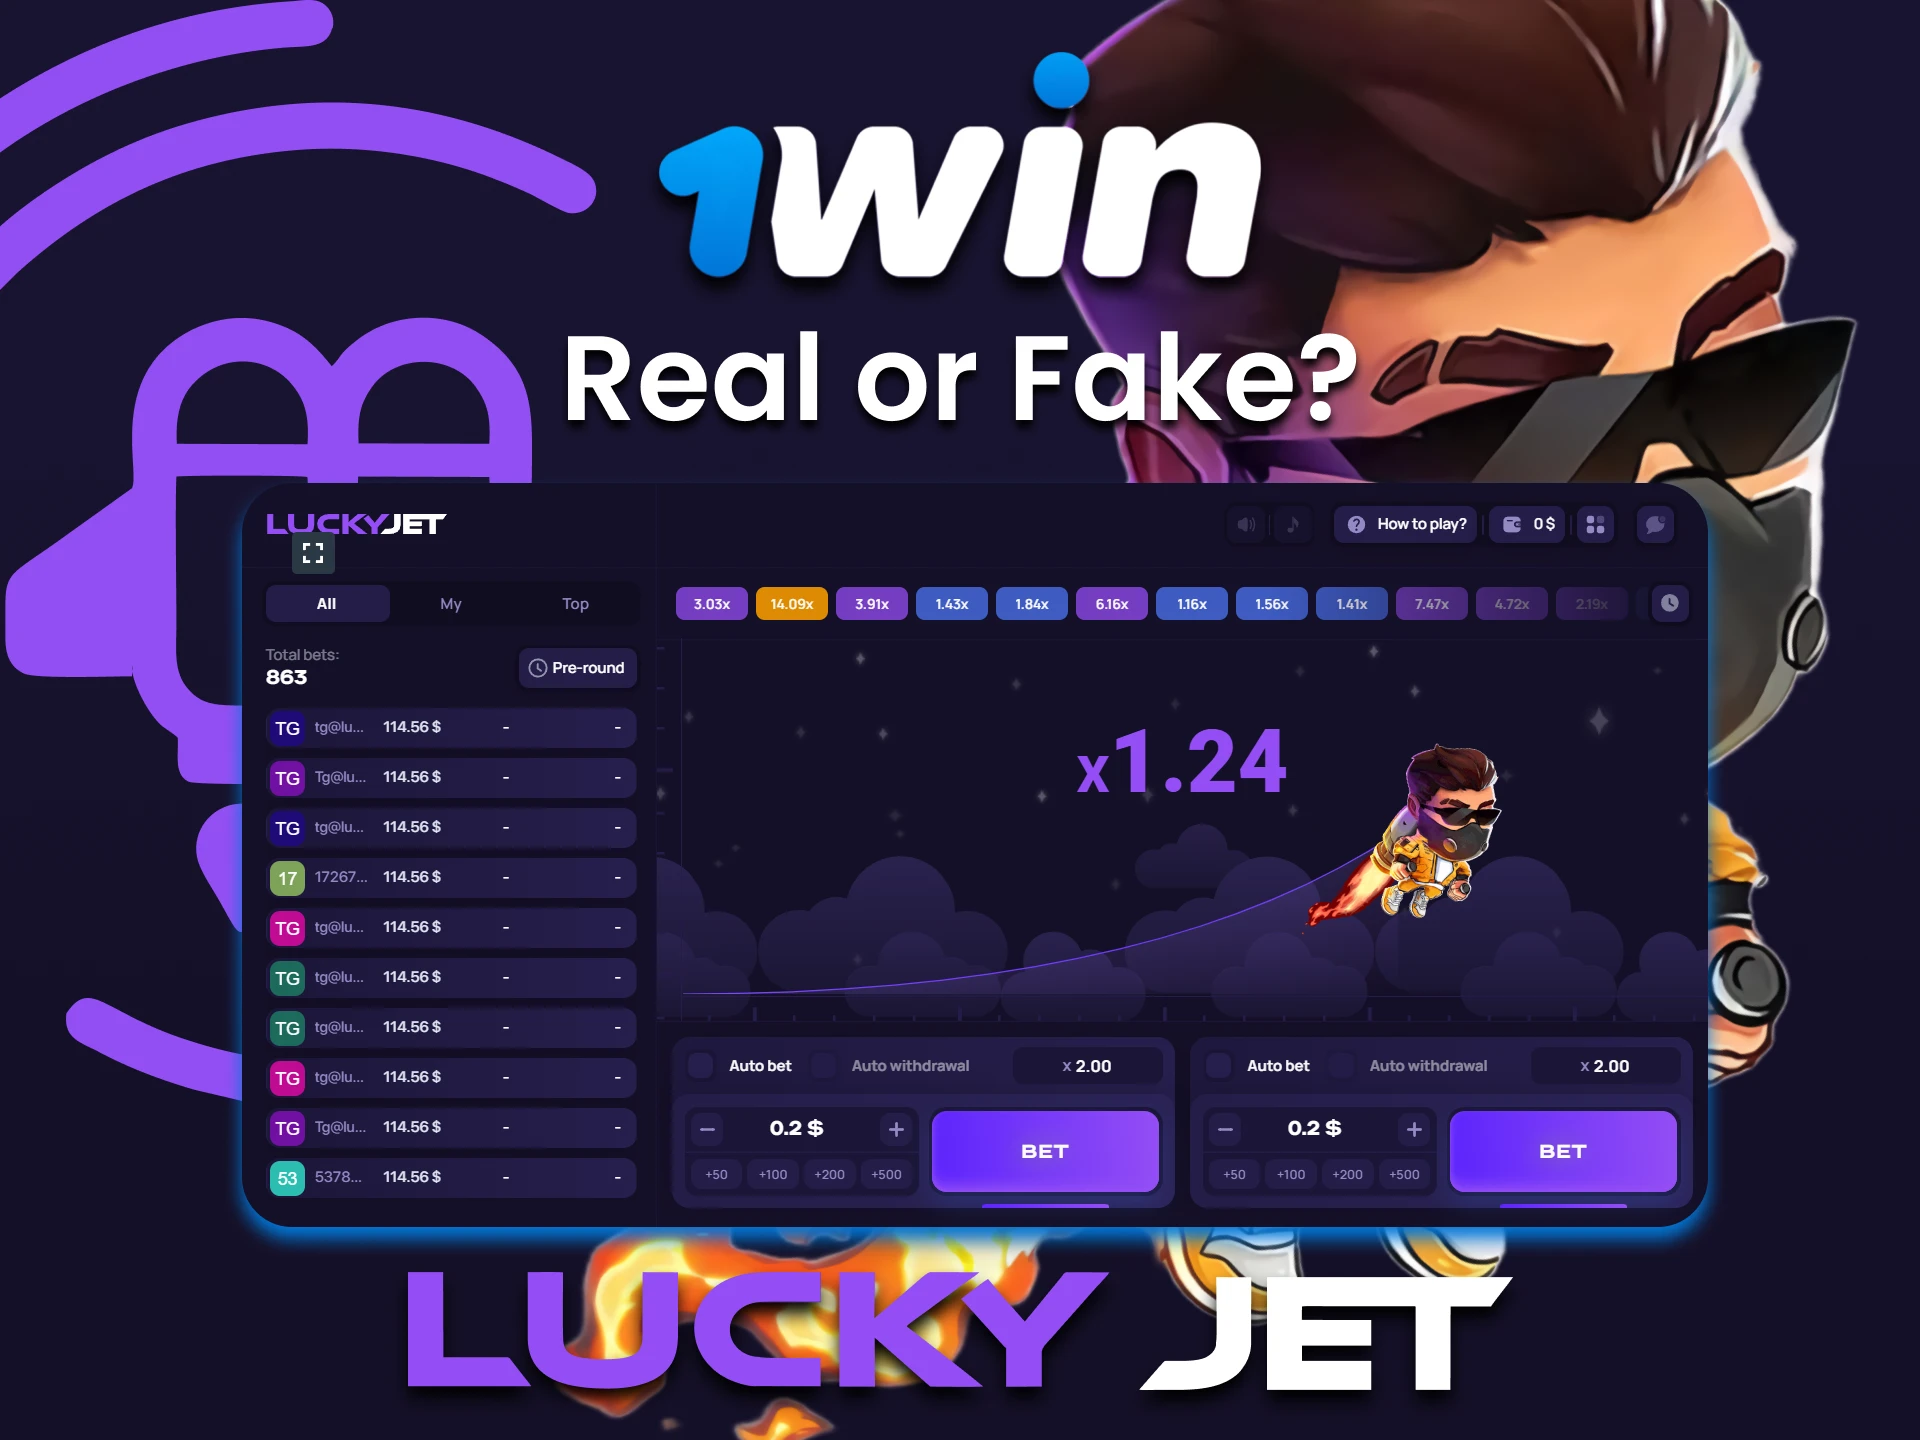 Lucky Jet is an absolute real game on the 1win platform.